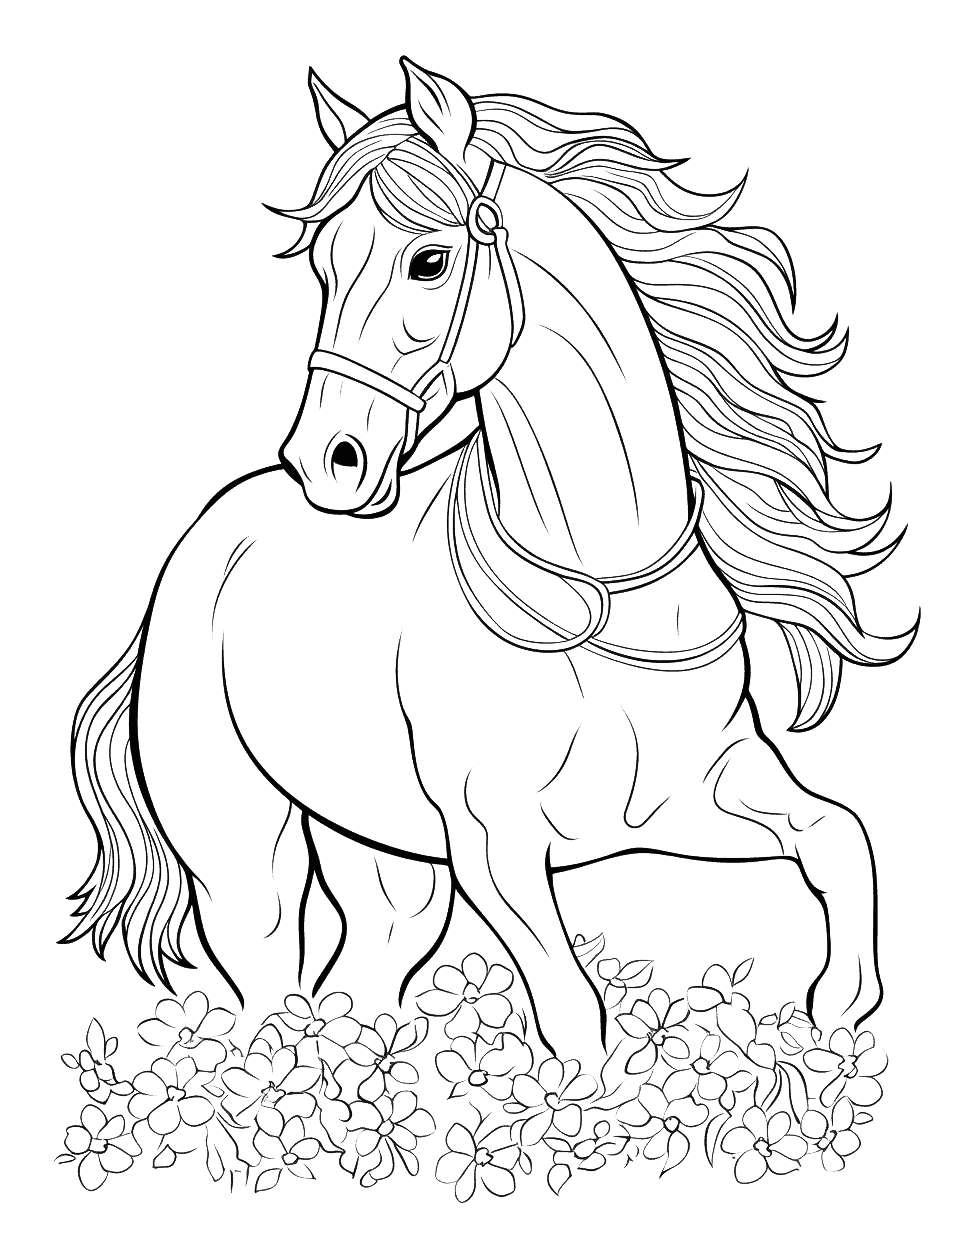 Full Page Wild Mustang Coloring Page - A full-page, intricately drawn Mustang in its natural environment.